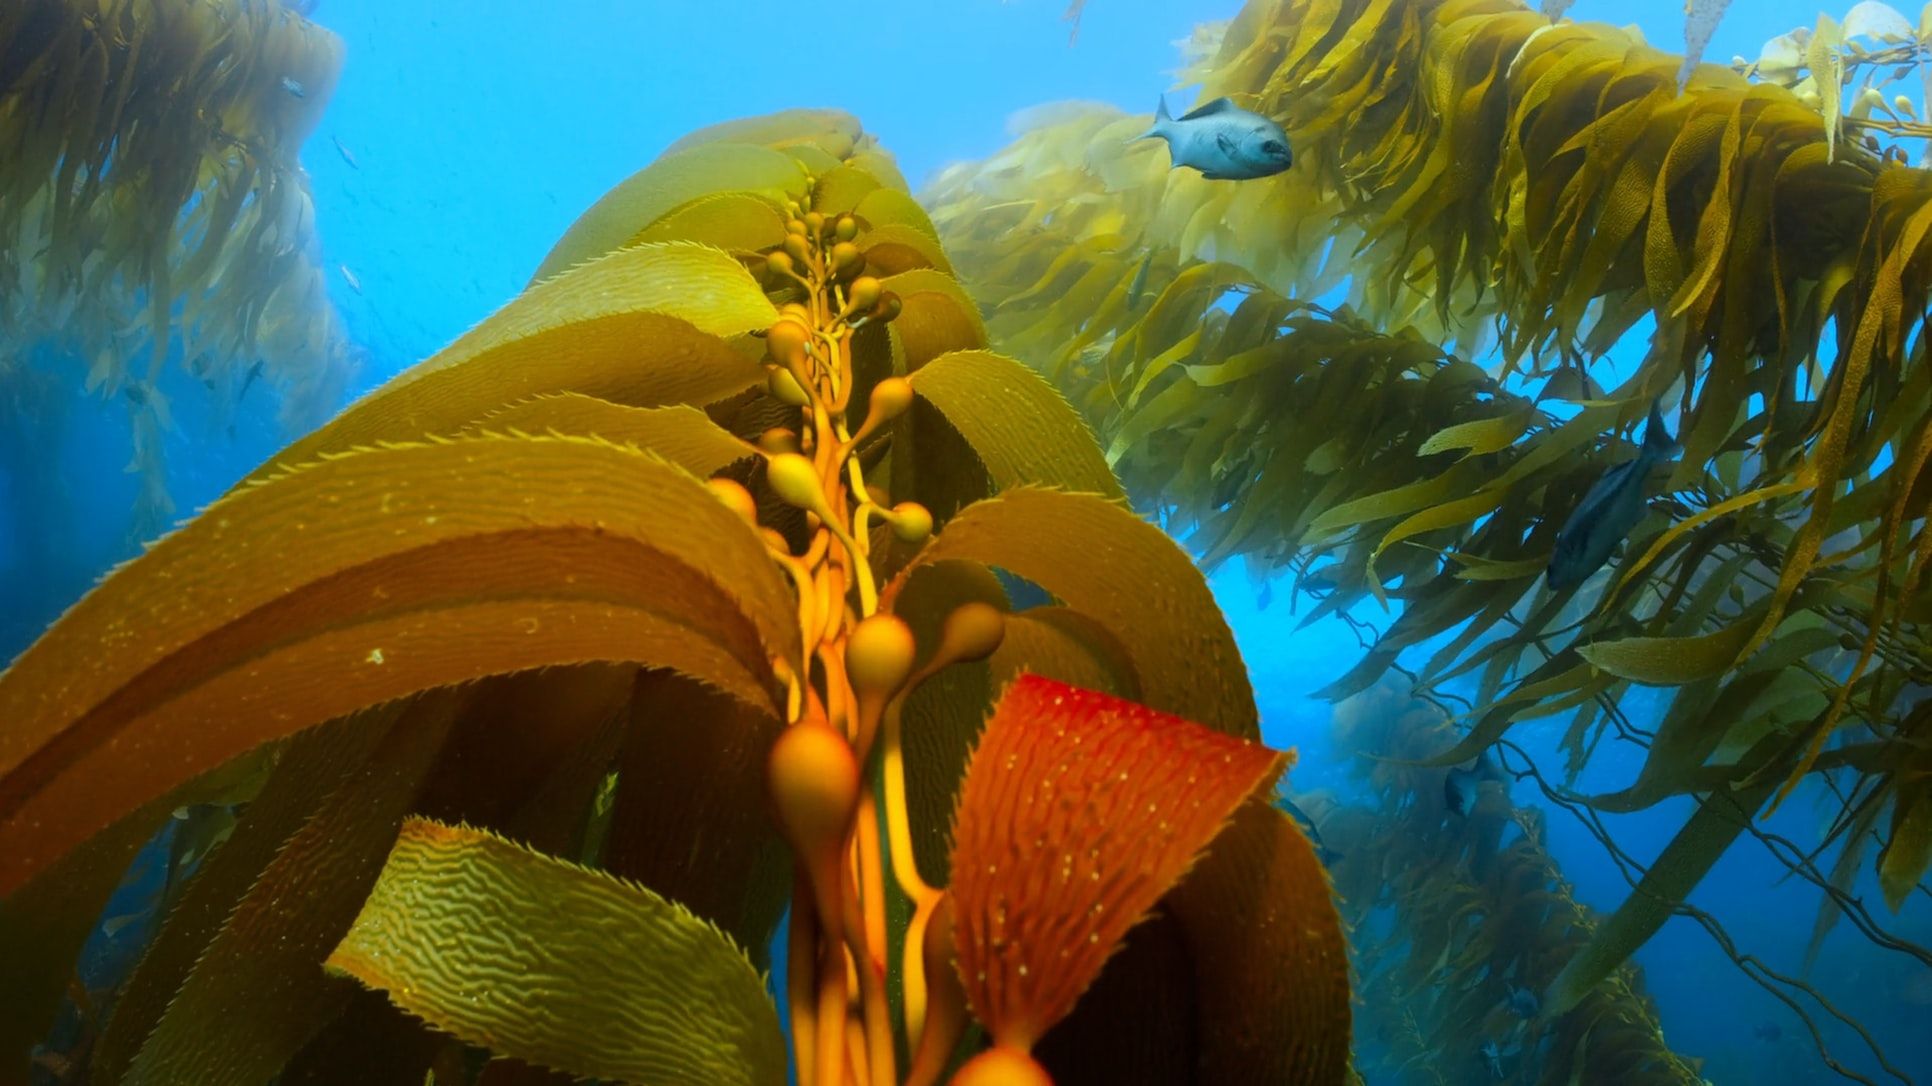 Can submersible seaweed platforms help regenerate ecosystems and provide economic returns?